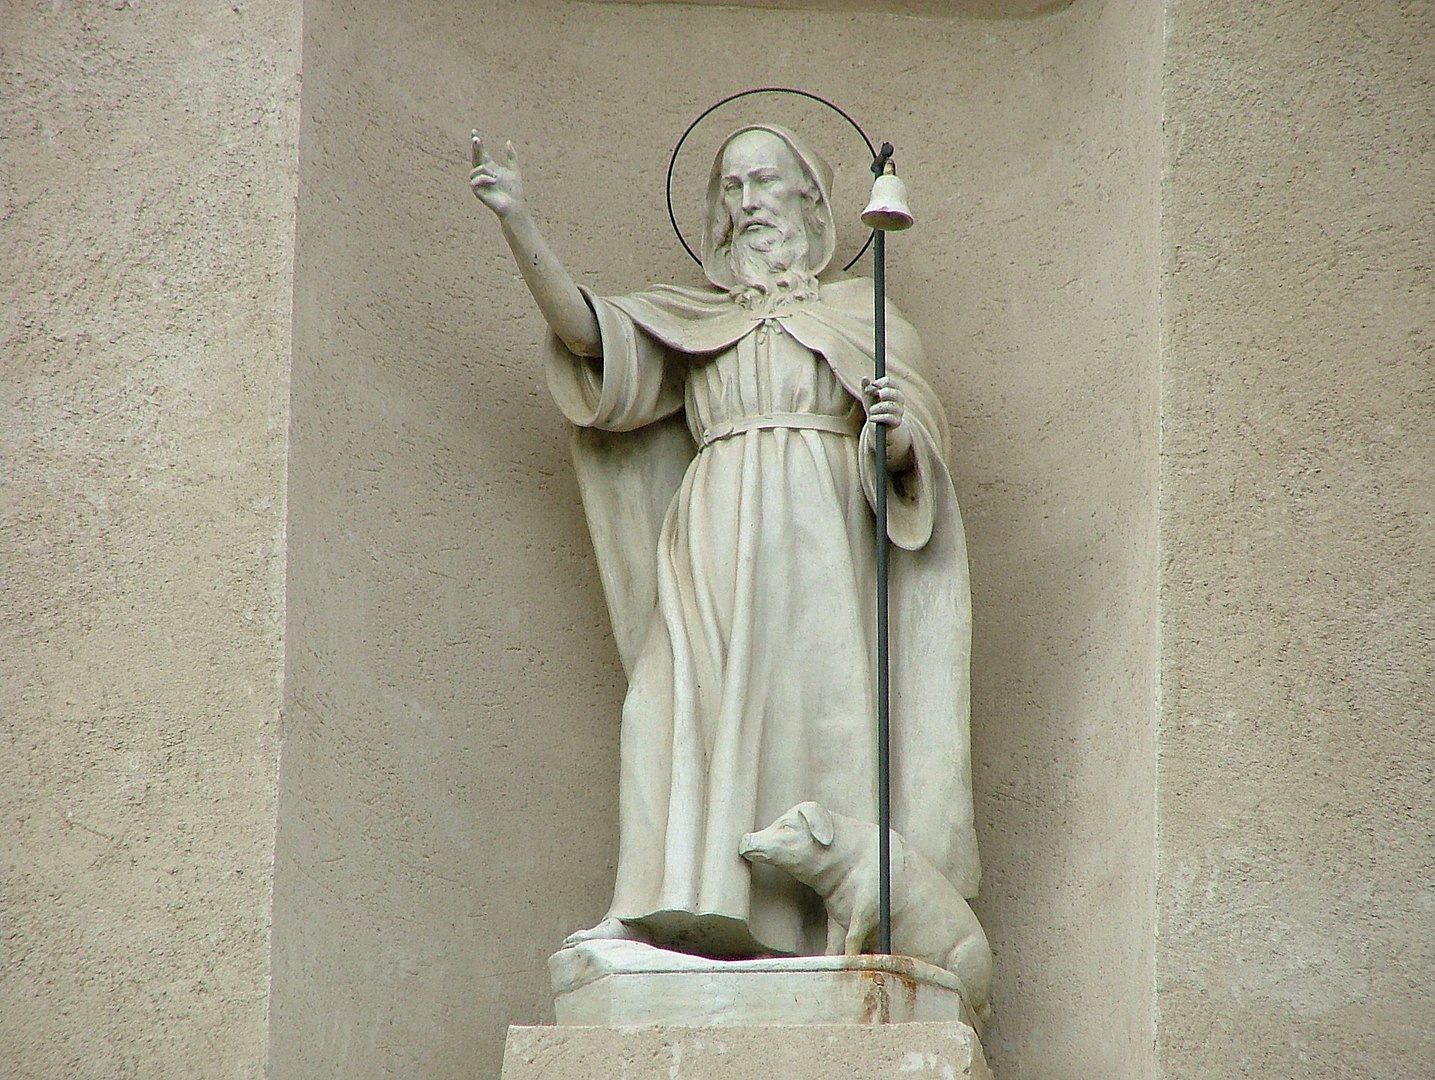 Saint anthony the abbot: the statue of the saint